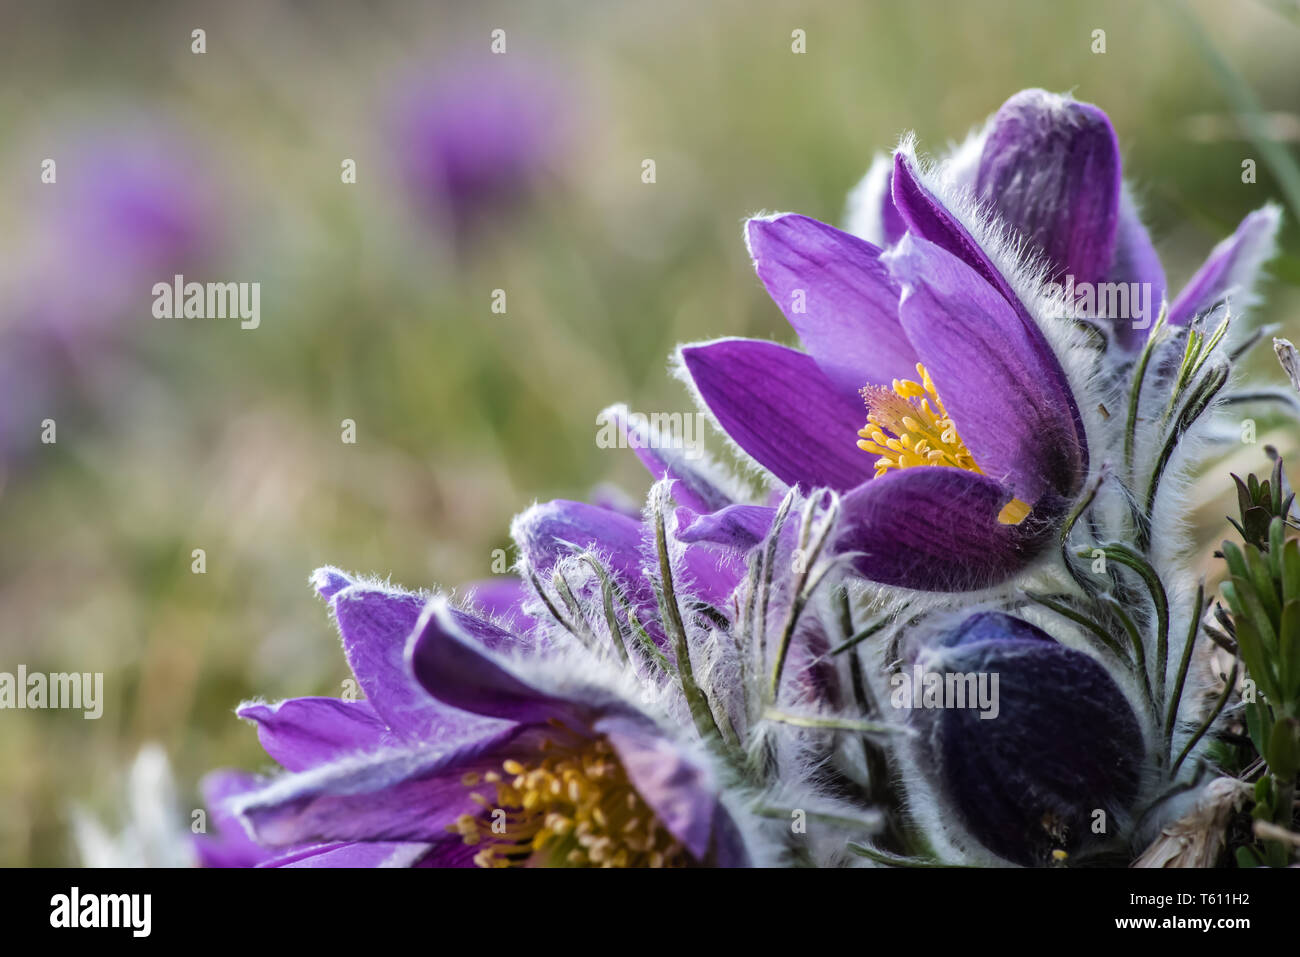 A pasque flower or Anemone pulsatilla (Pulsatilla vulgaris) against the light so the silver-grey hair stands out and the beautiful yellow stamen and p Stock Photo